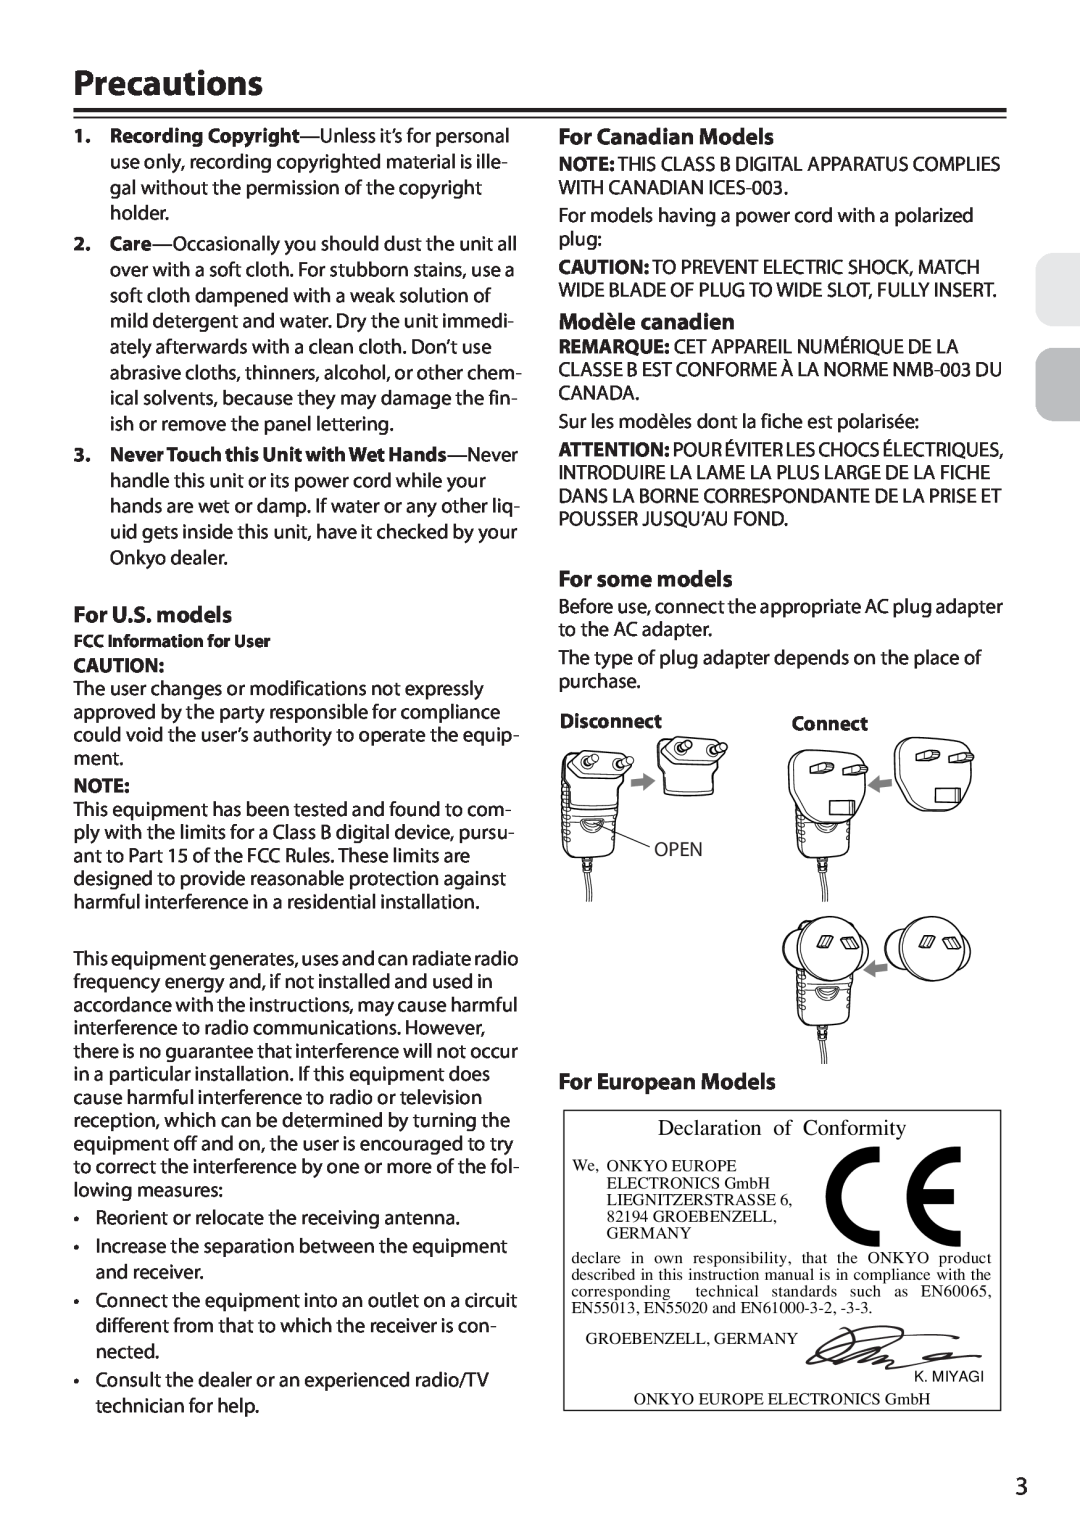 Onkyo DS-A3 Precautions, For U.S. models, For Canadian Models, Modèle canadien, For some models, For European Models 